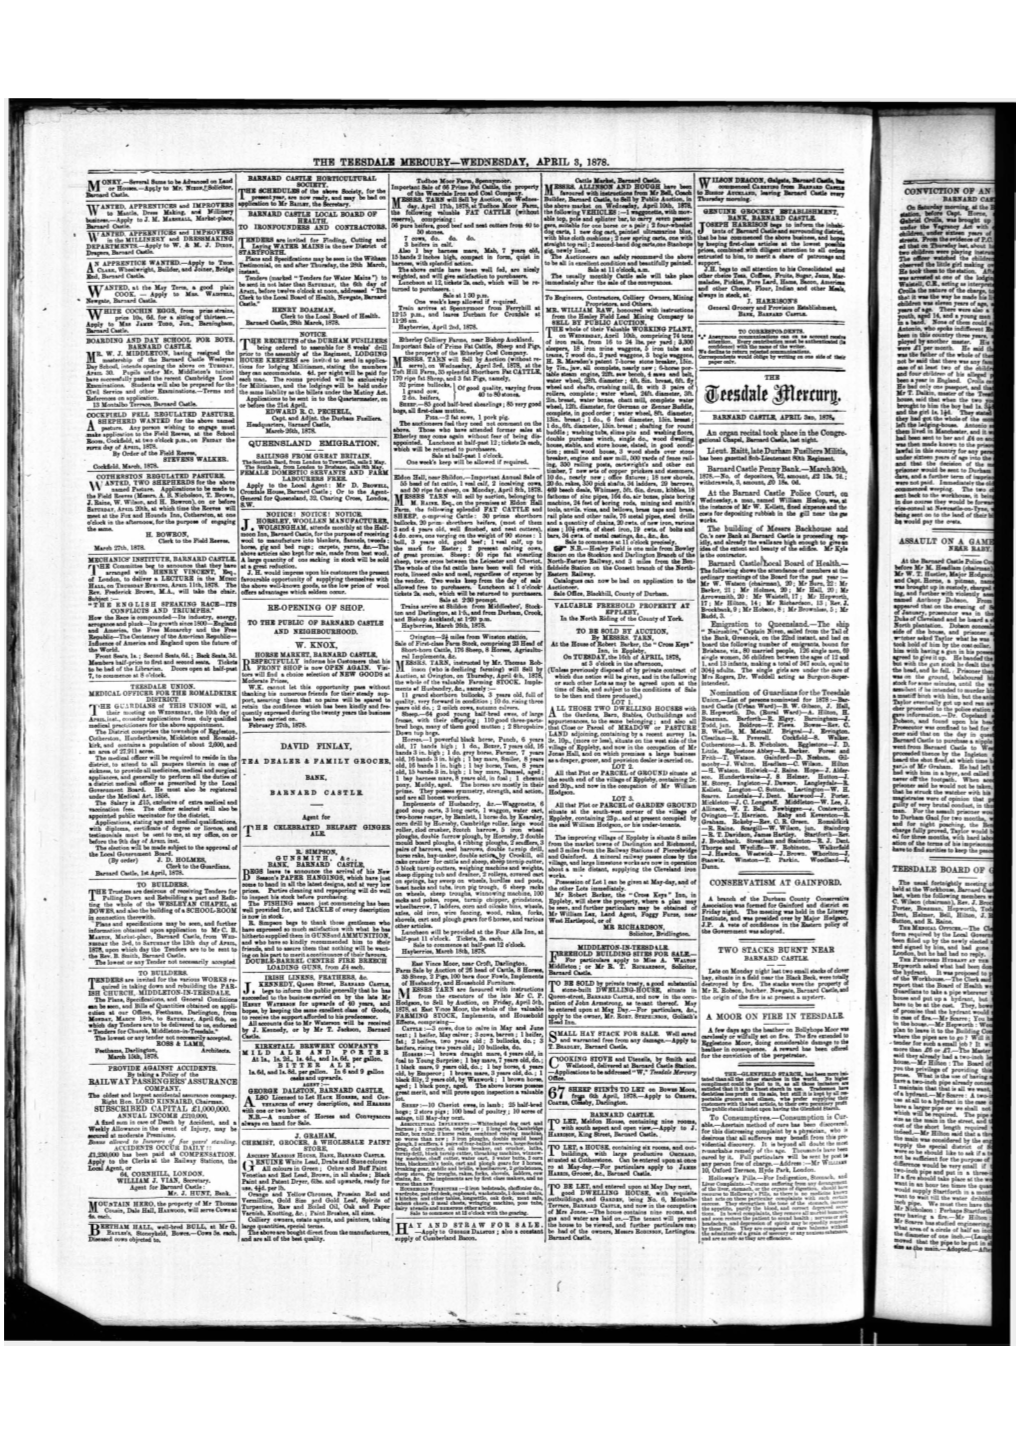 The Teesdale Mercury—Wednesday, April 8, 1878. 1